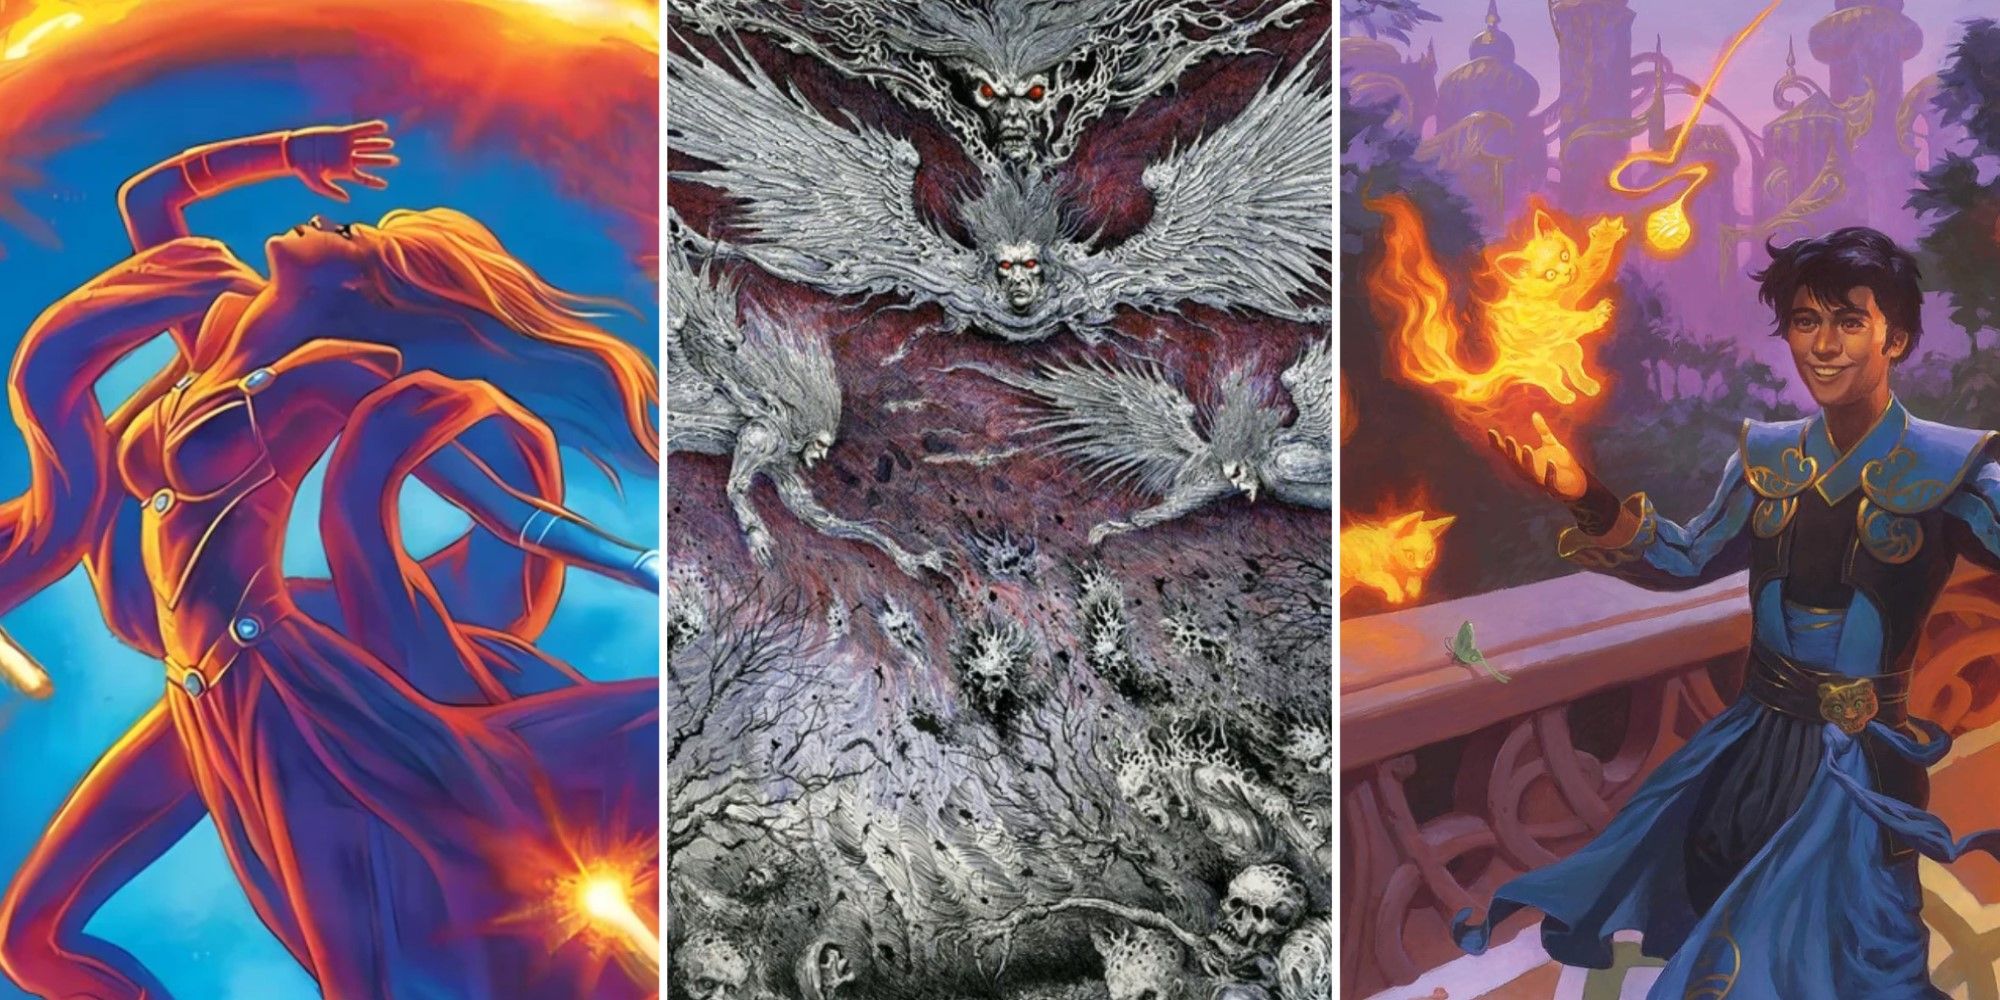 Artwork from three different cards in the Magic: The Gathering expansion Double Masters 2022.